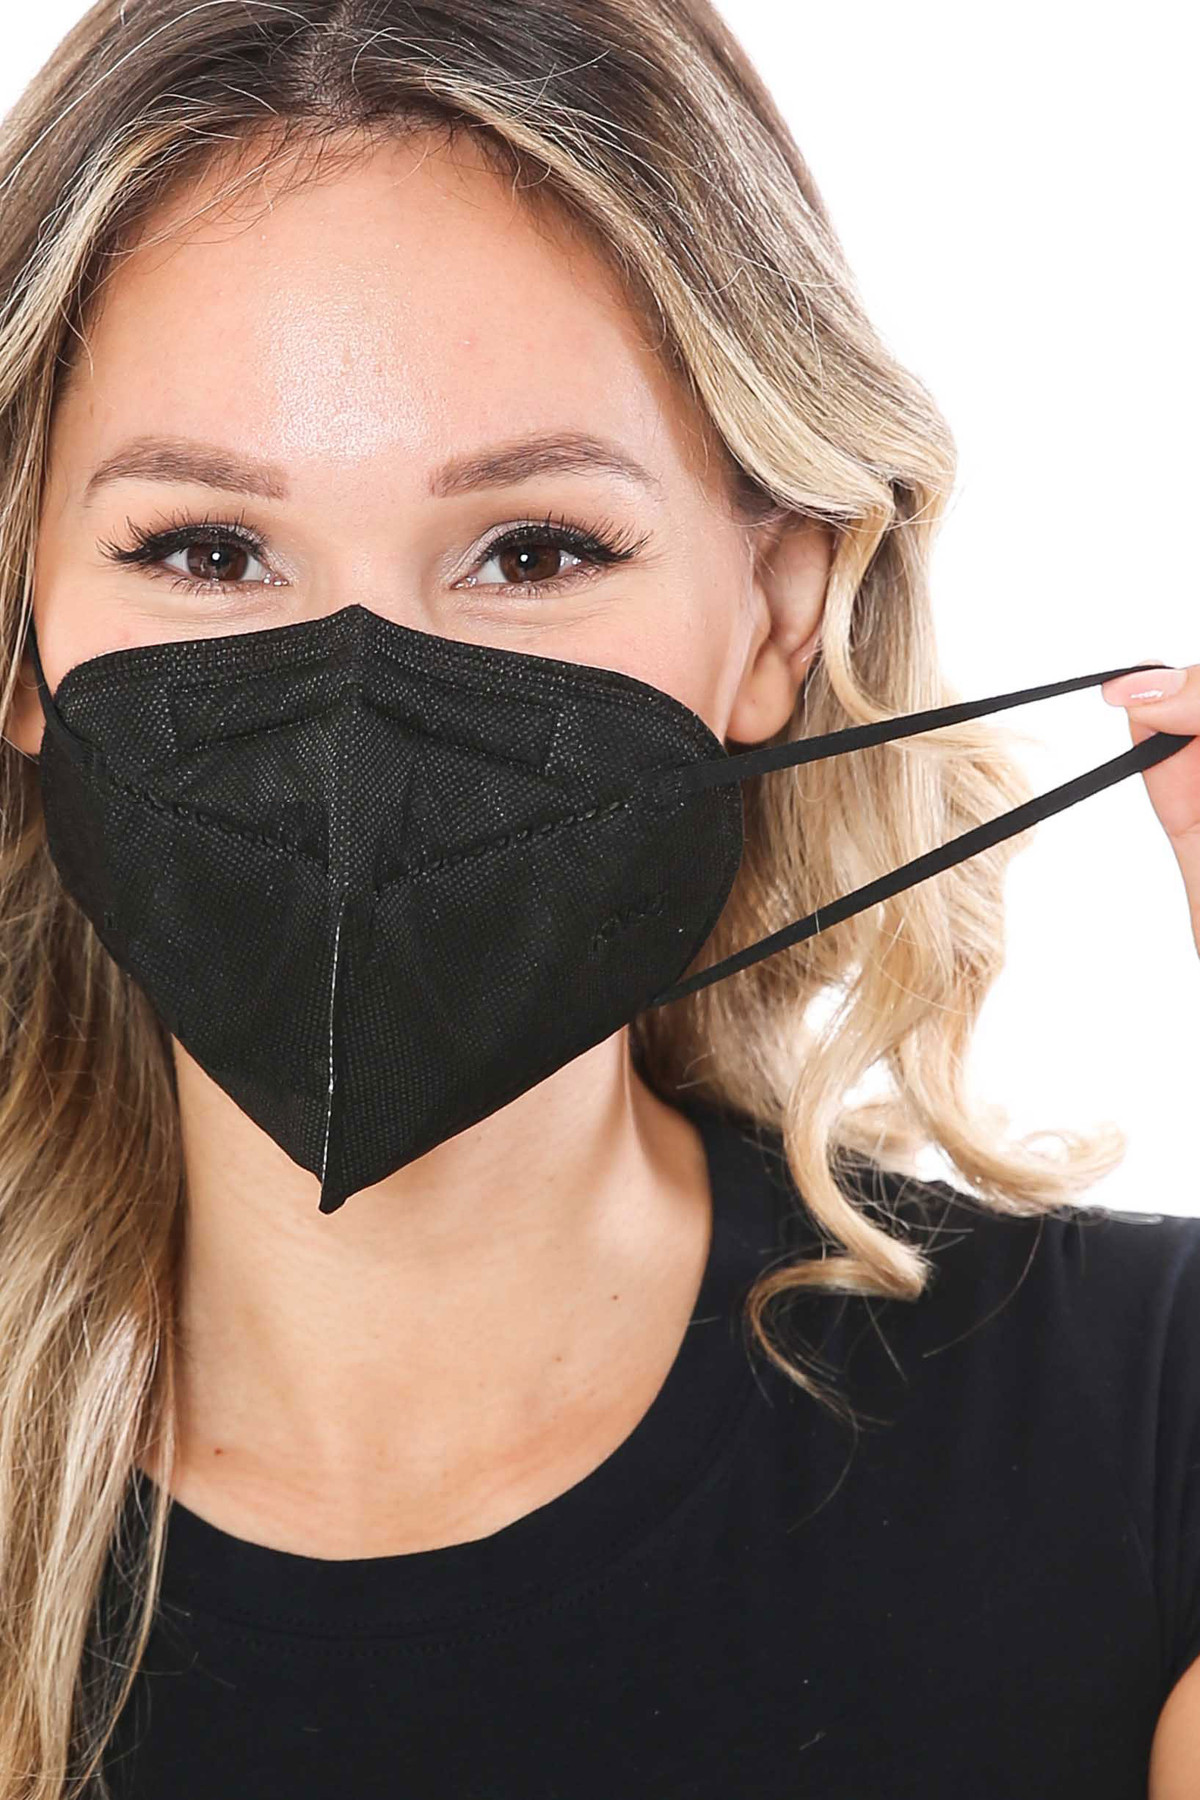 PLAIN BLACK- curved nose mask- for child and adult Face/Dust mask